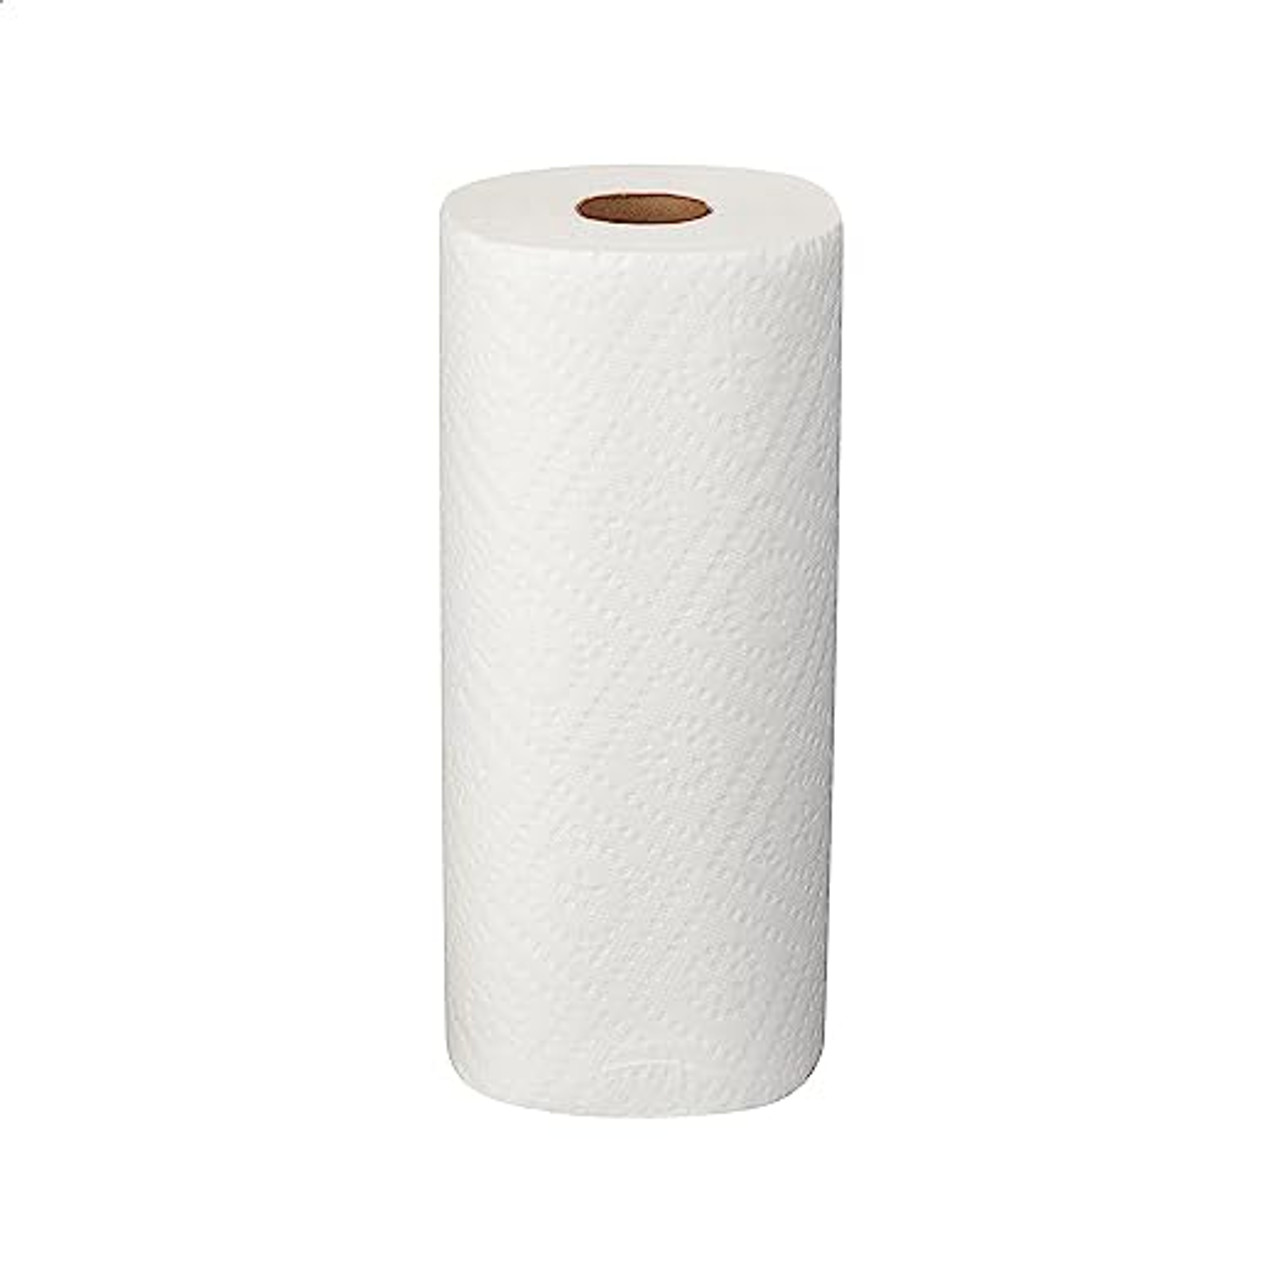 SafePro Pt, 2-Ply White Paper Towels Roll, 30/cs